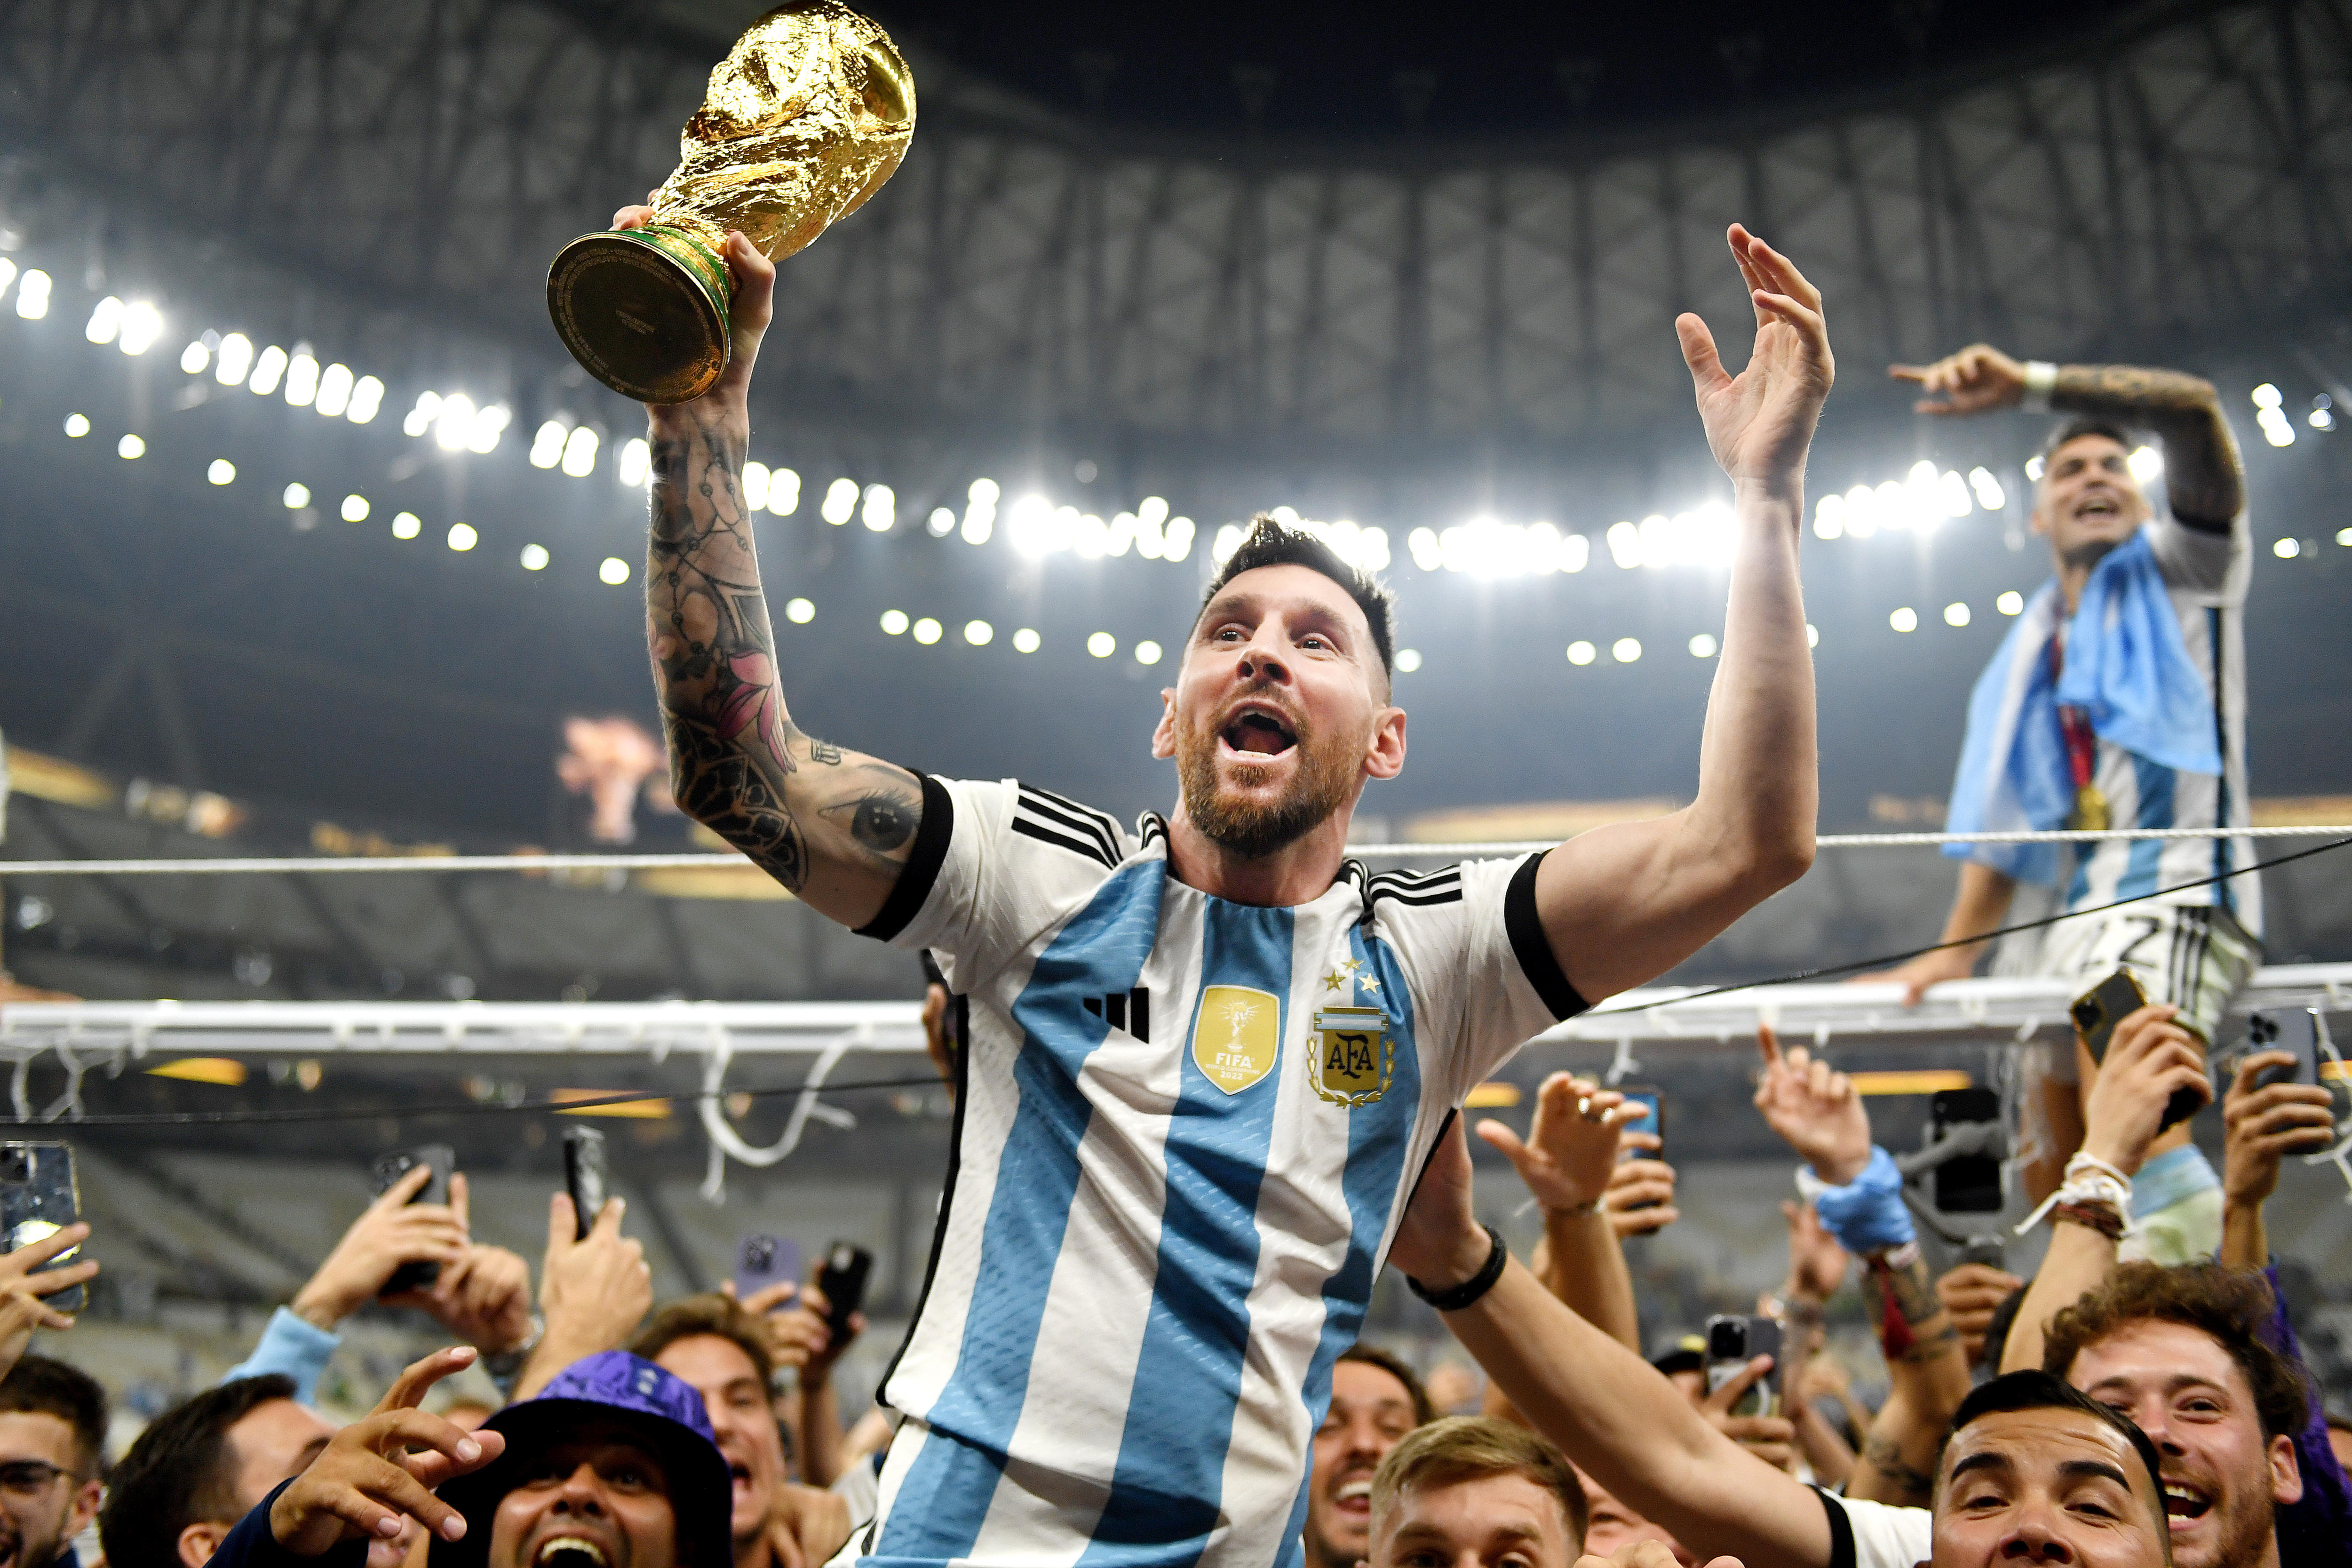 Qatar 2022 - Leo Messi breaks another record after winning the